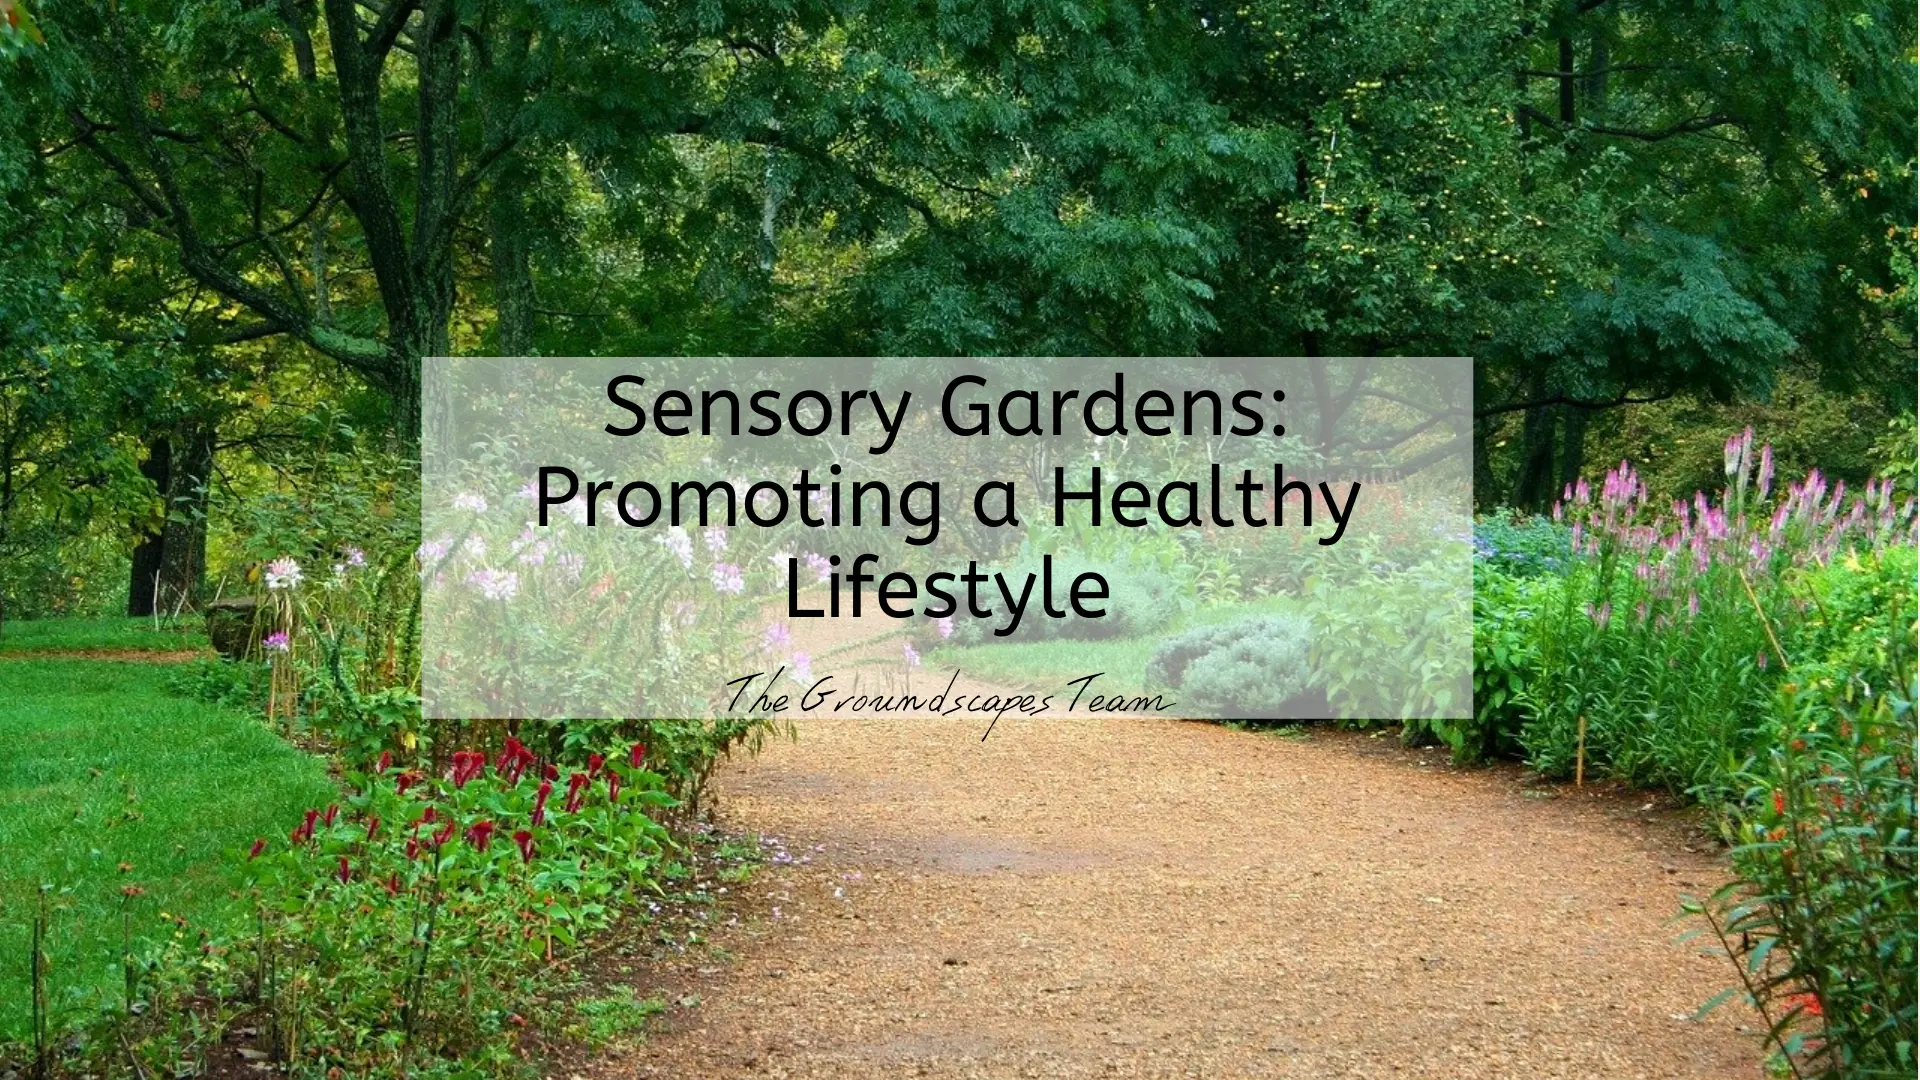 Sensory Gardens: Promoting a Healthy Lifestyle